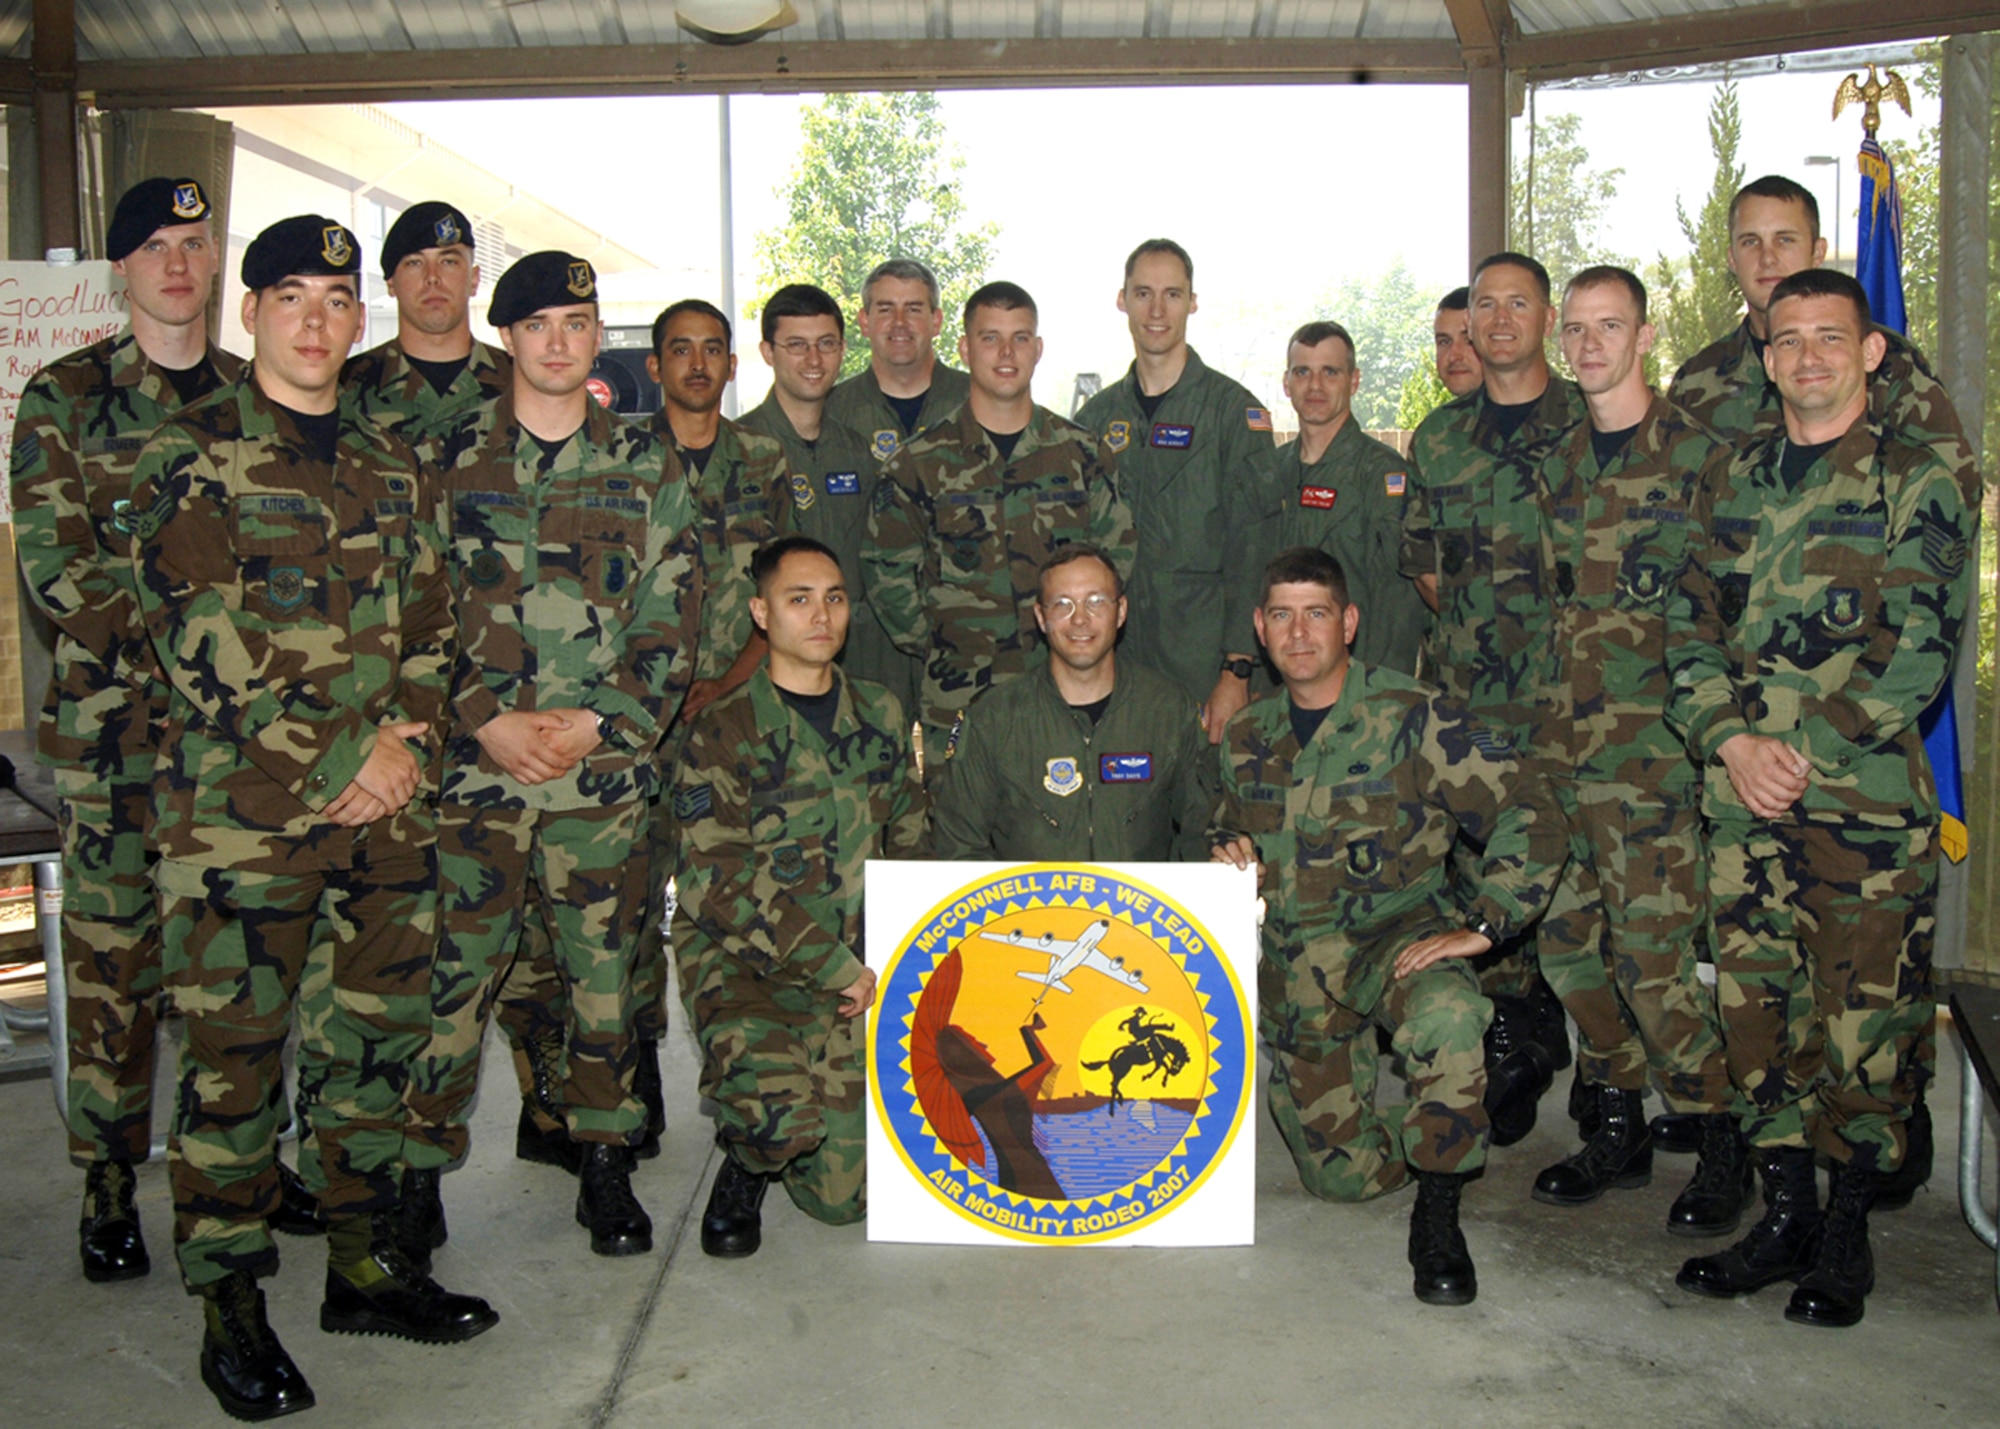 The 2007 McConnell Team players gather at the Rodeo kickoff picnic May 18 at the 931st  Air Refueling Group pavilion. Tech. Sgt. Darryl Dauphin, 22nd Aircraft Maintenance Squadron, (standing far right), is the winner of the Rodeo logo/patch design. His design will be worn by McConnell participants at the 2007 Air Mobility Command Rodeo, July 22 -28, at McCord Air Force Base, Wash. (Photo by Airman 1st Class Laura Suttles)